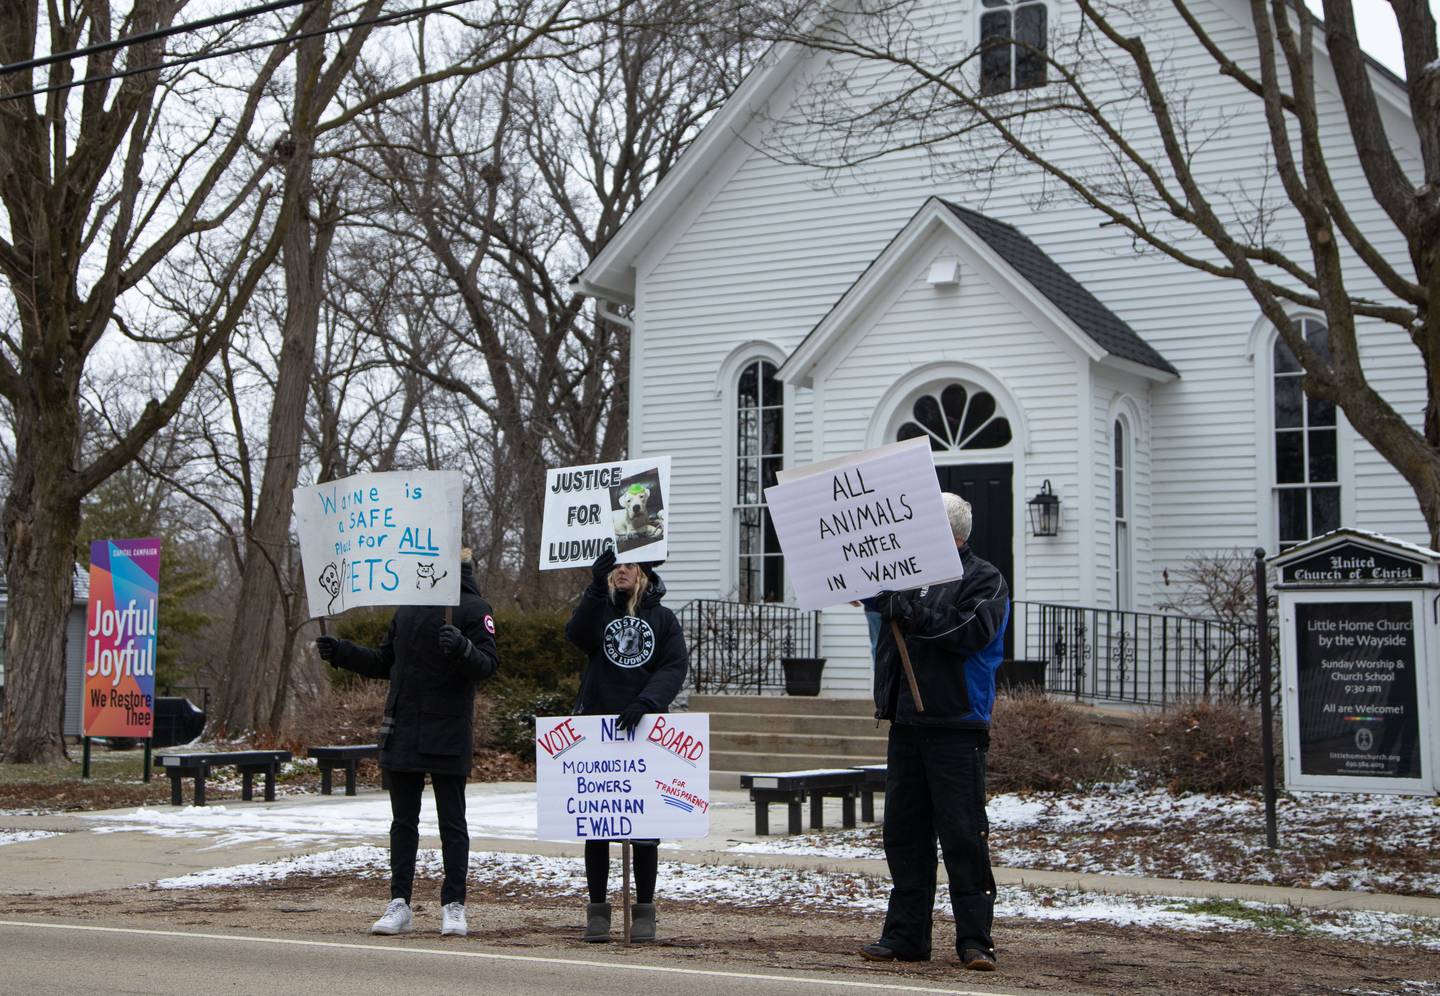 Justice for Ludwig protesters hold up signs asking for new village leadership outside a town hall meeting at the Little Home Church by the Wayside in Wayne on Saturday, Jan. 7, 2023.